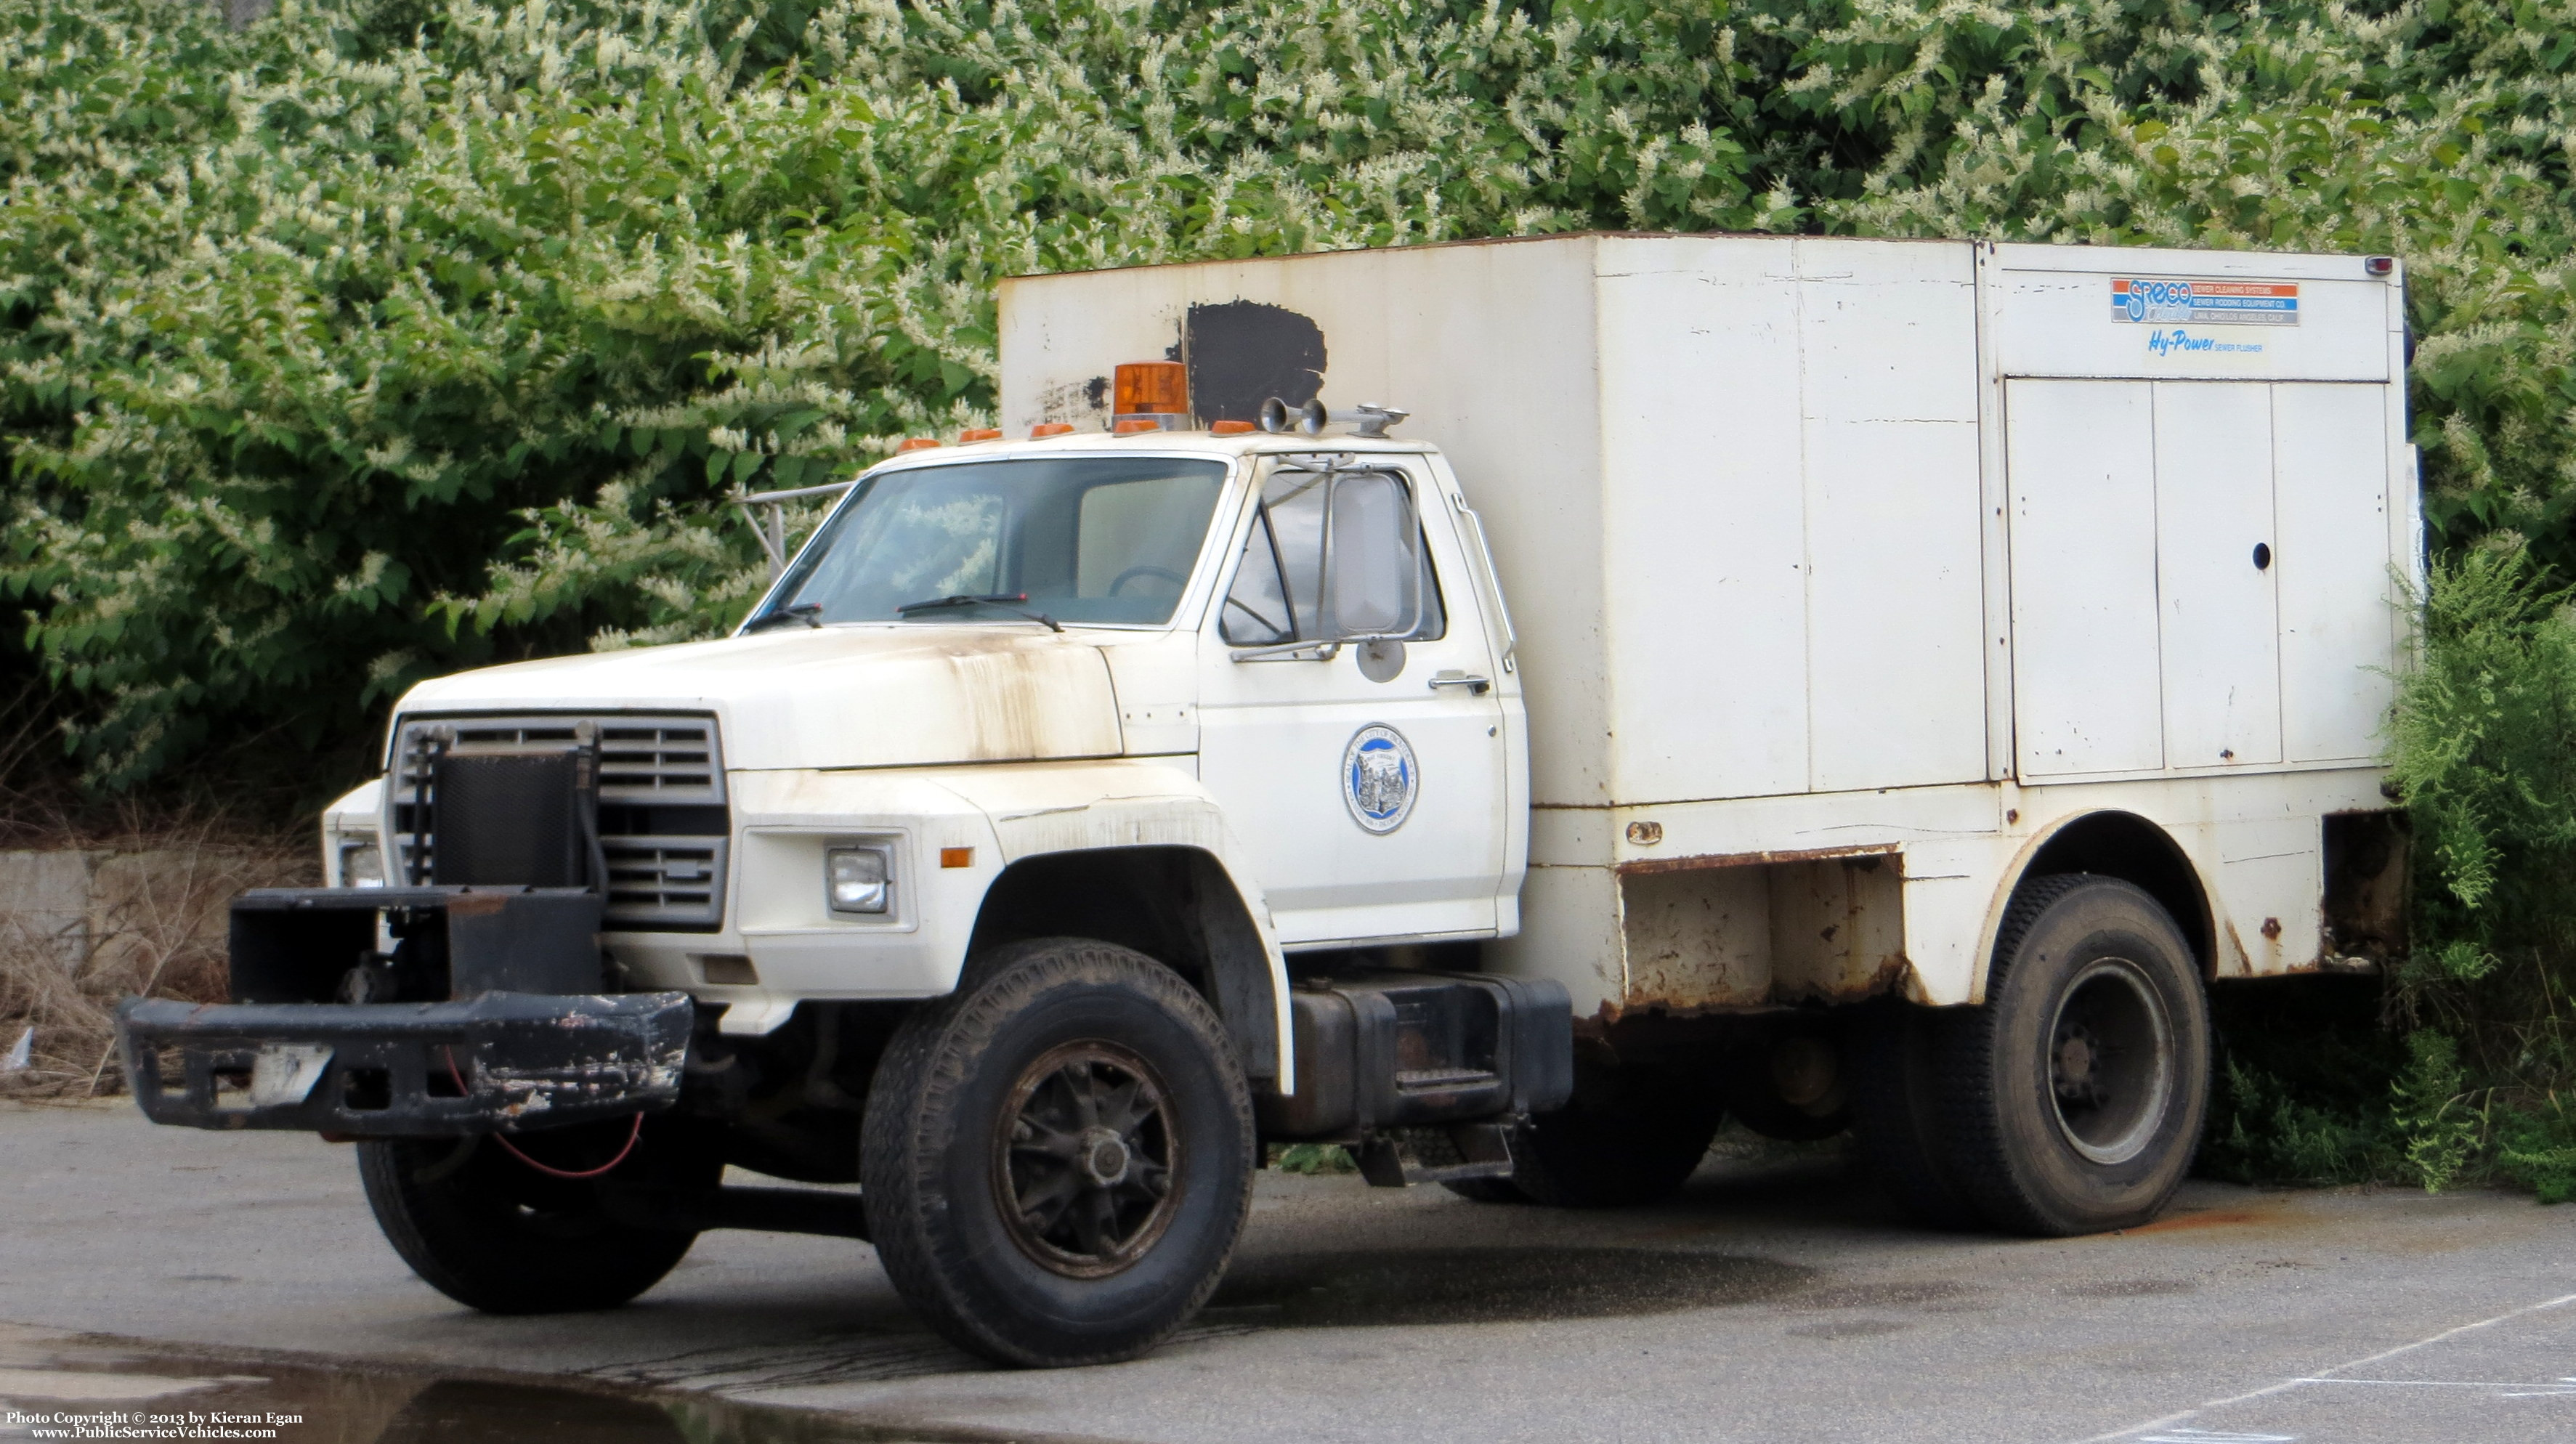 A photo  of Providence Sewer Division
            Truck 97, a 1980-1994 Ford F-600             taken by Kieran Egan